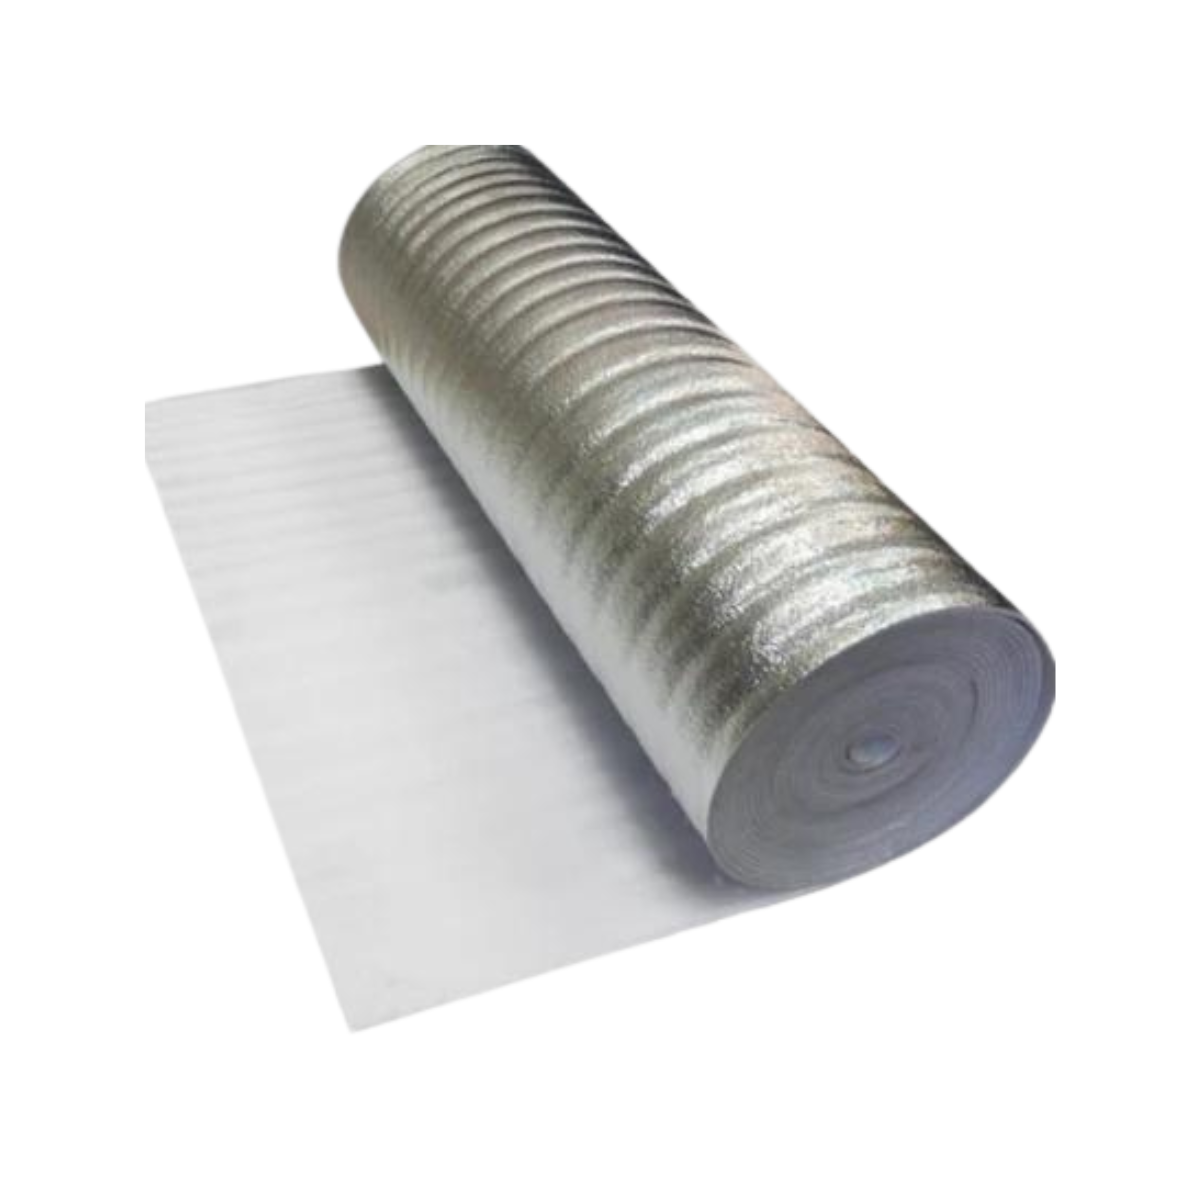 Floorest - White Underpad Silver EPE Foam 2mm  - 200 SQ/FT